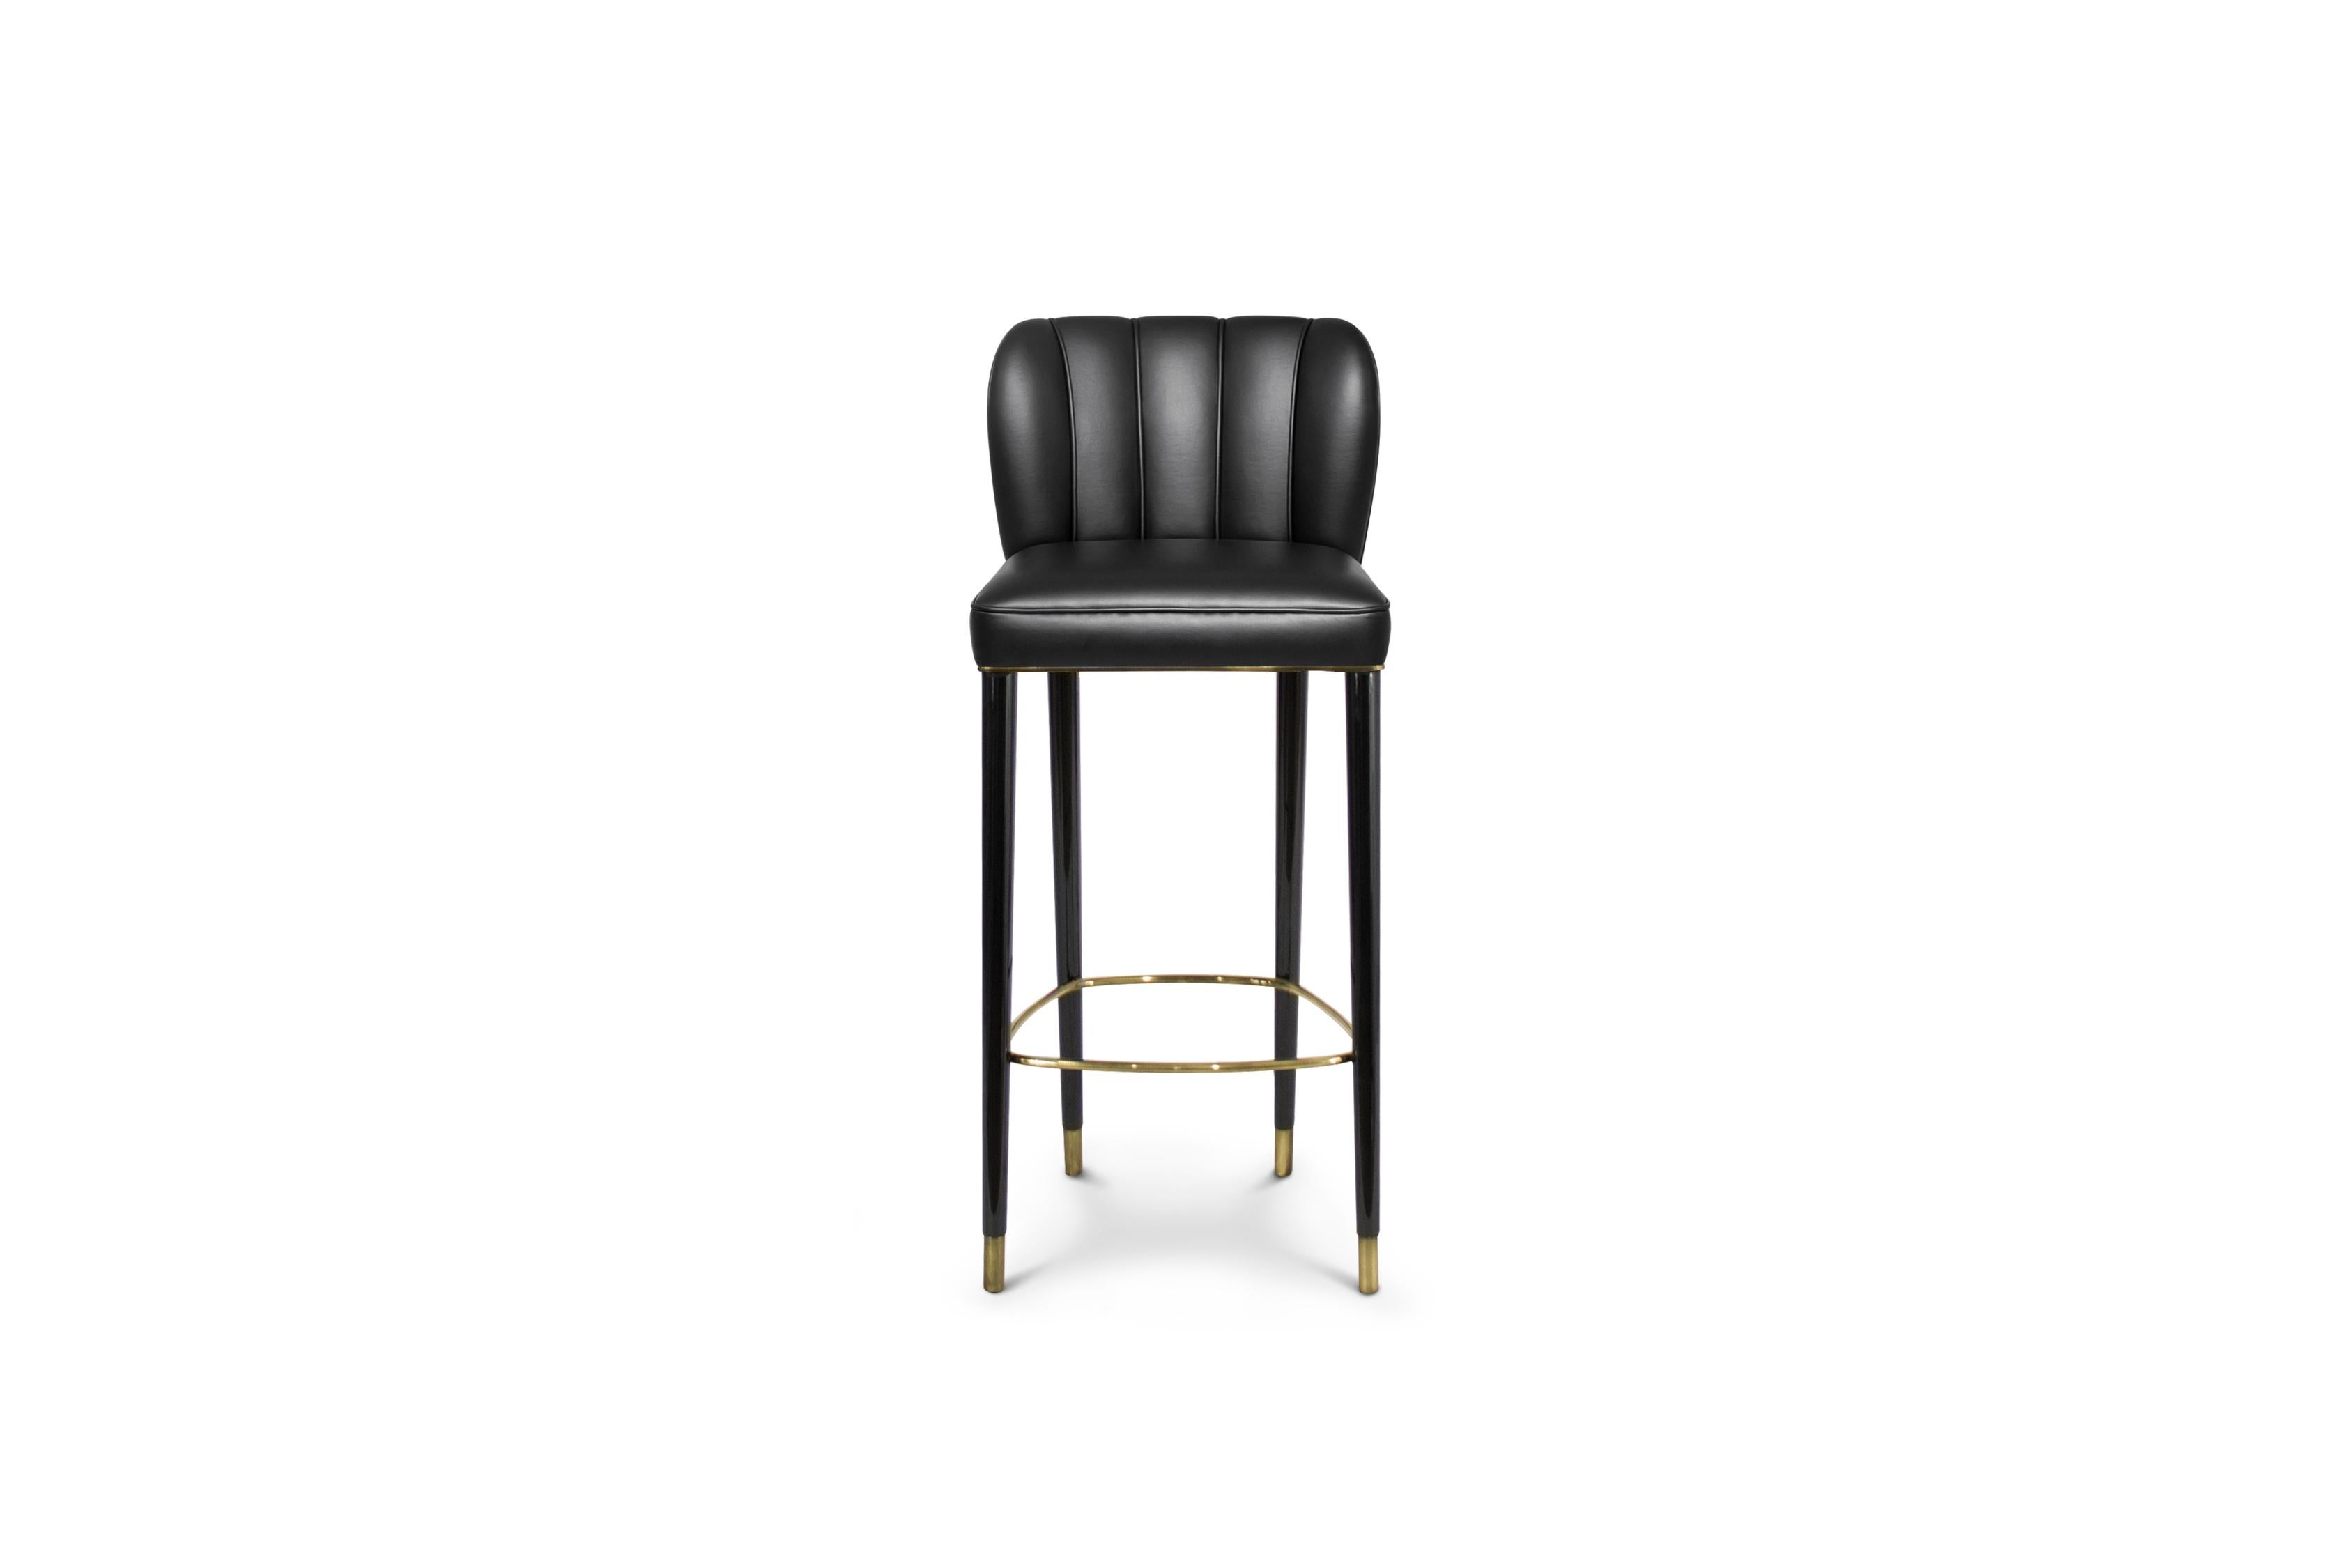 If Cleopatra was alive today, how would it be the furniture of her palace? This question dared our design team to create Dalyan bar chair. With legs in glossy black lacquer with glossy aged brass details, this Faux Leather bar stool breathes